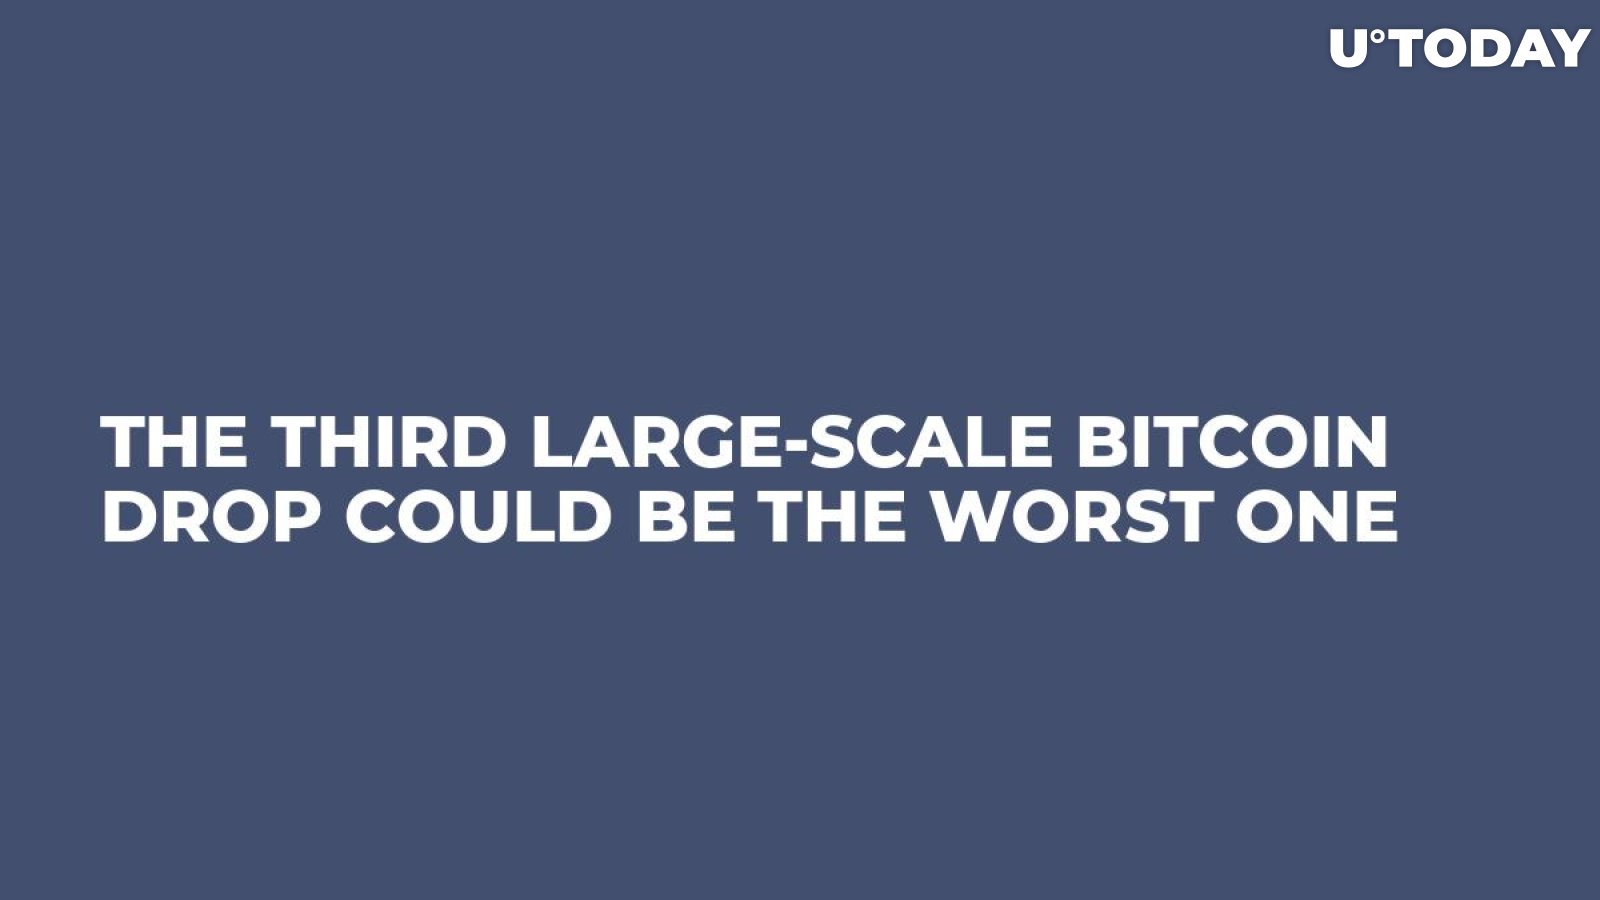 The Third Large-scale Bitcoin Drop Could Be the Worst One